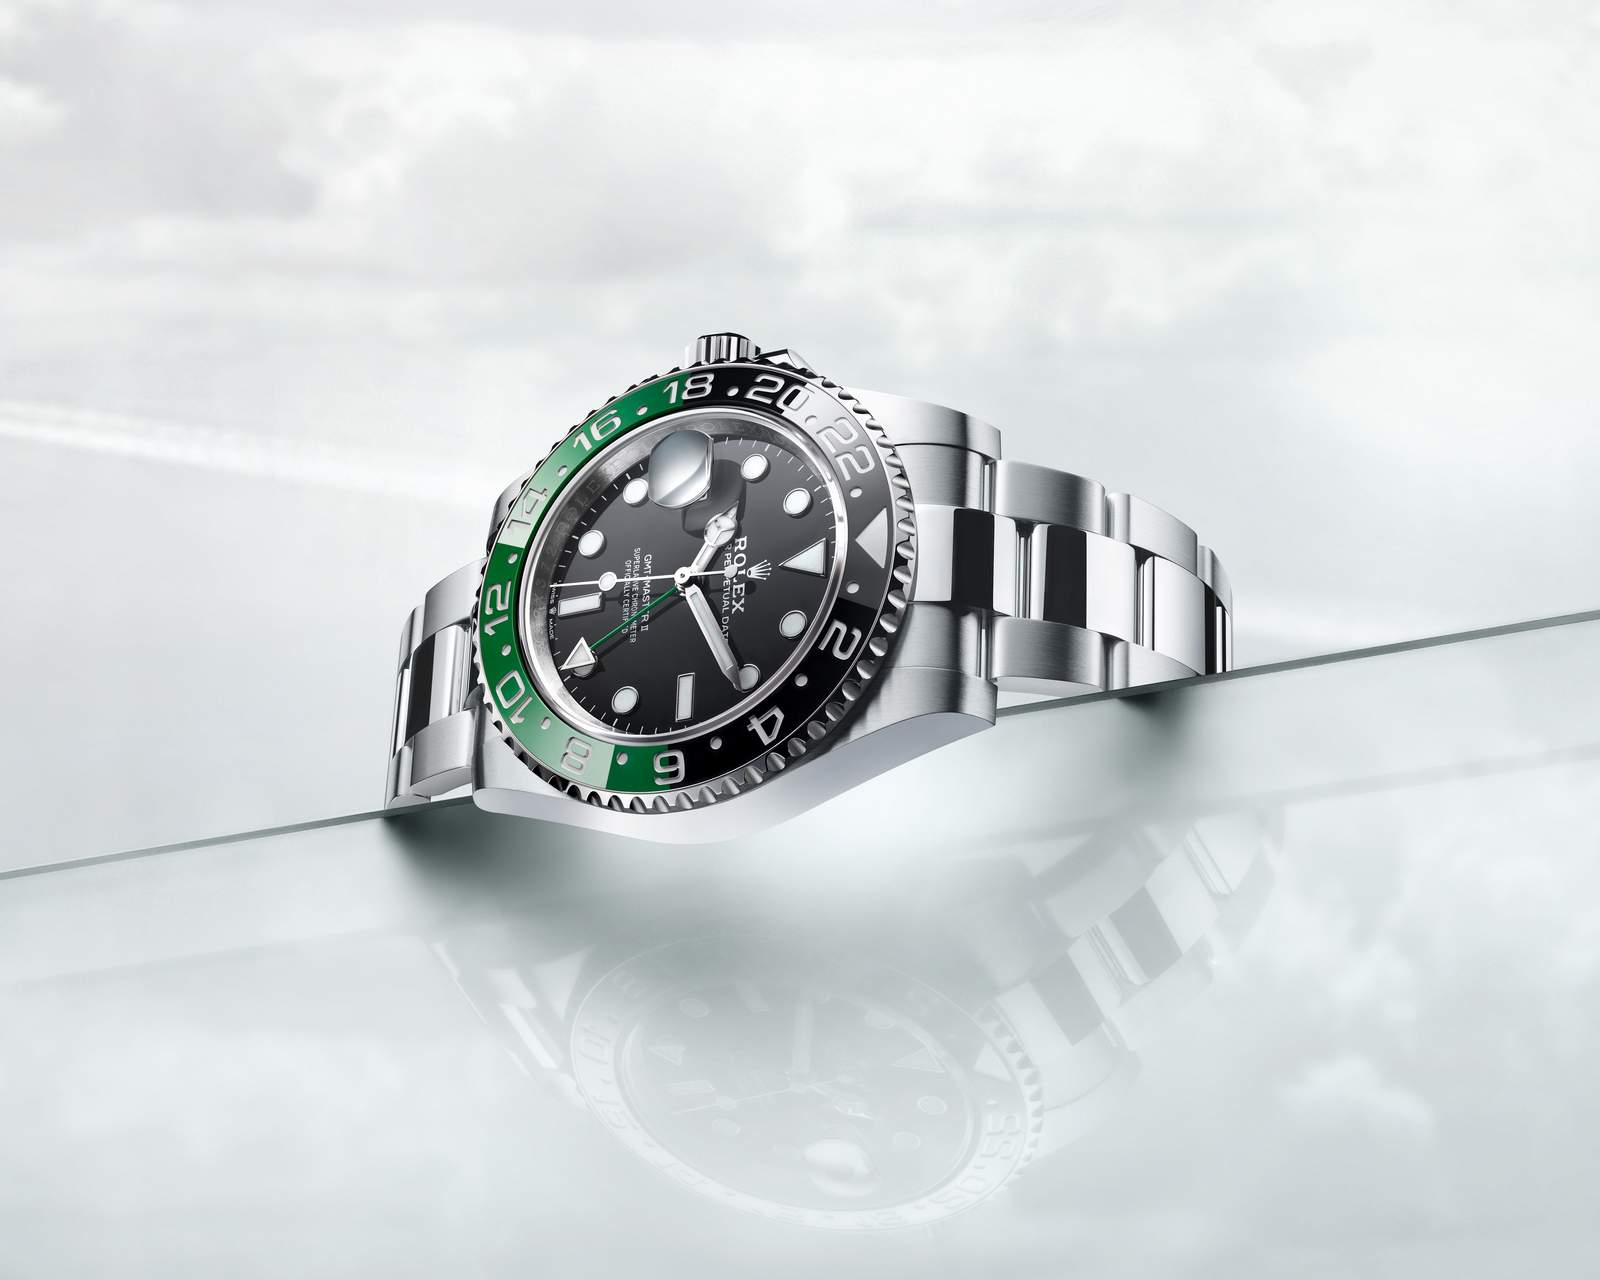 Rolex has debuted a new GMT-Master II with a left-handed layout and a green and black bezel